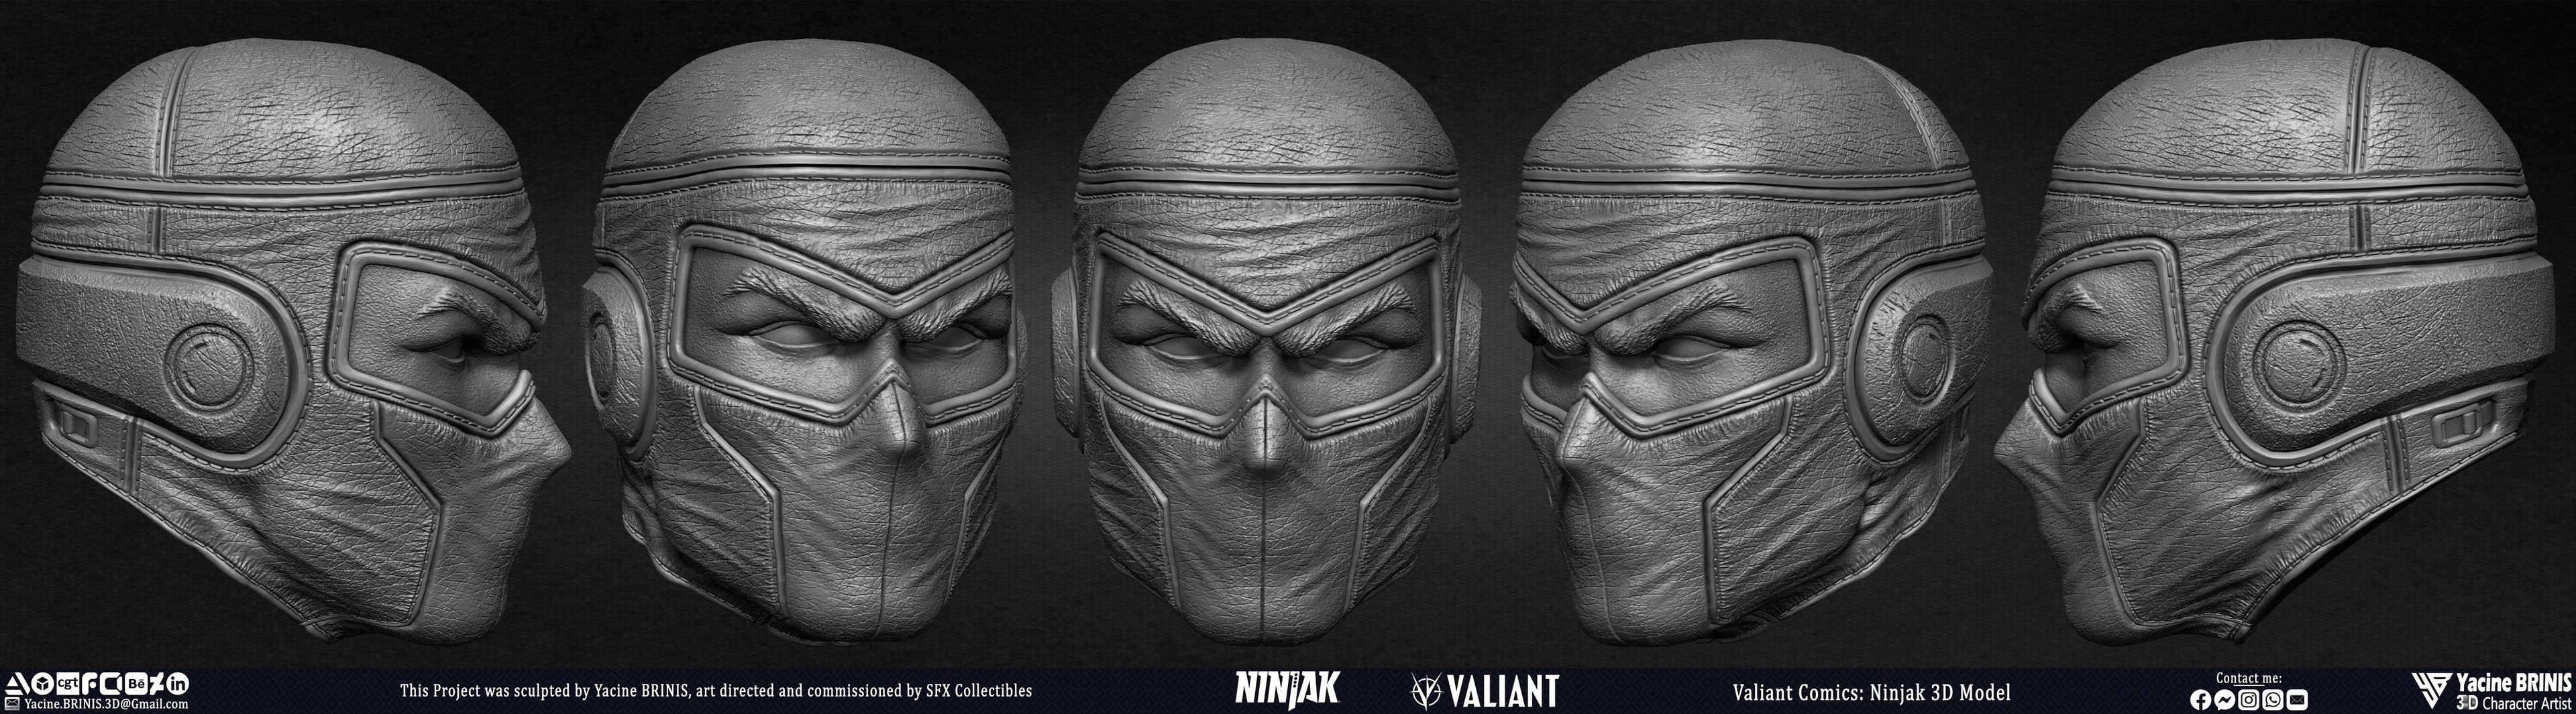 Ninjak Valiant Comics sculpted by Yacine BRINIS 011 real-time face